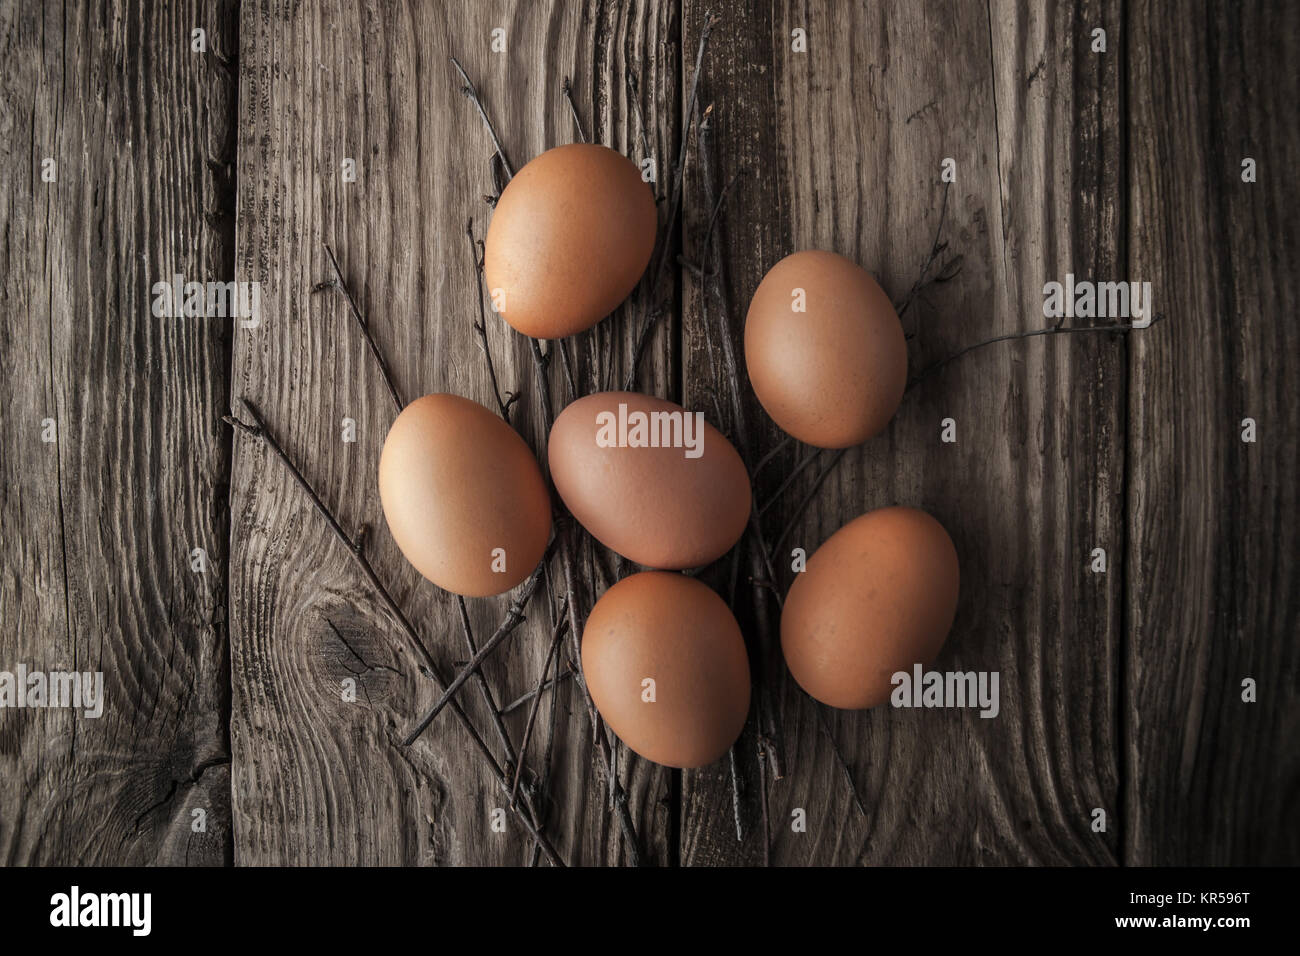 Chicken eggs on a wooden table Stock Photo